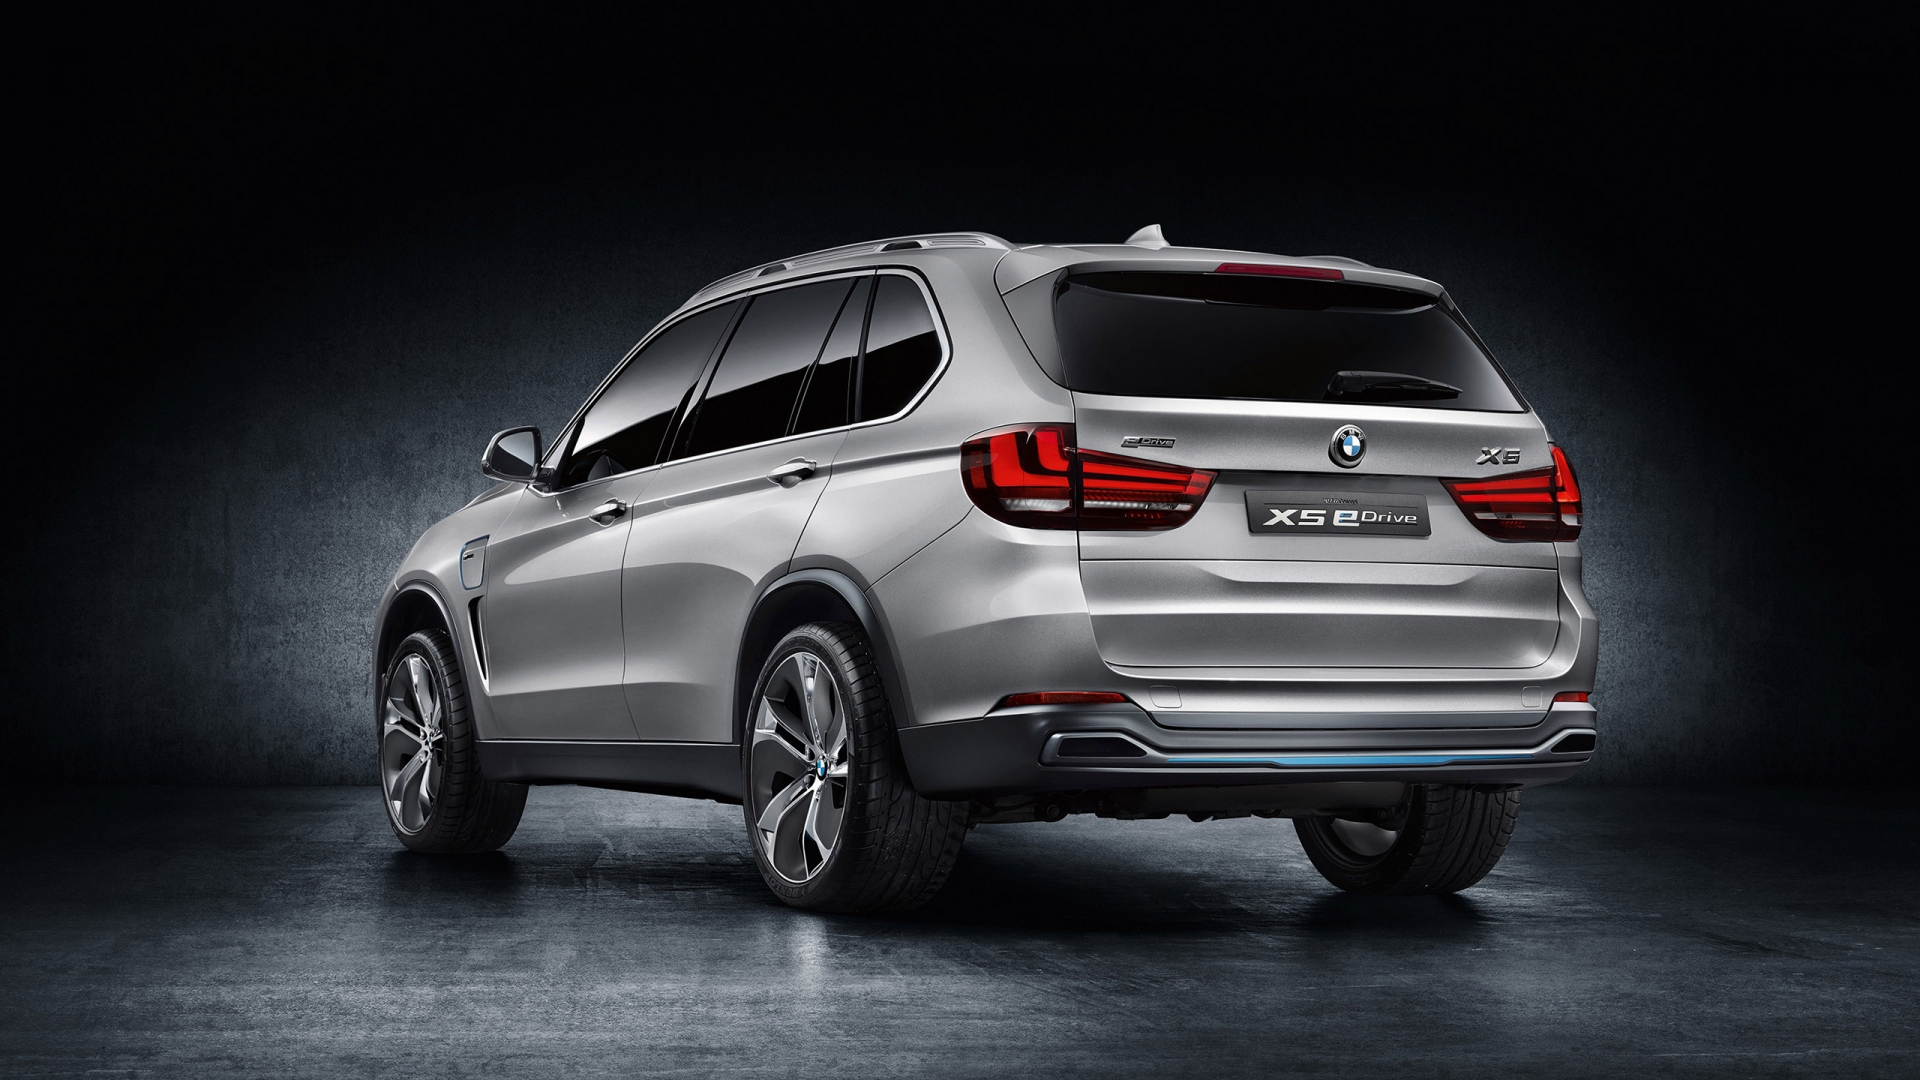 BMW X5 eDrive Concept Rear for 1920 x 1080 HDTV 1080p resolution